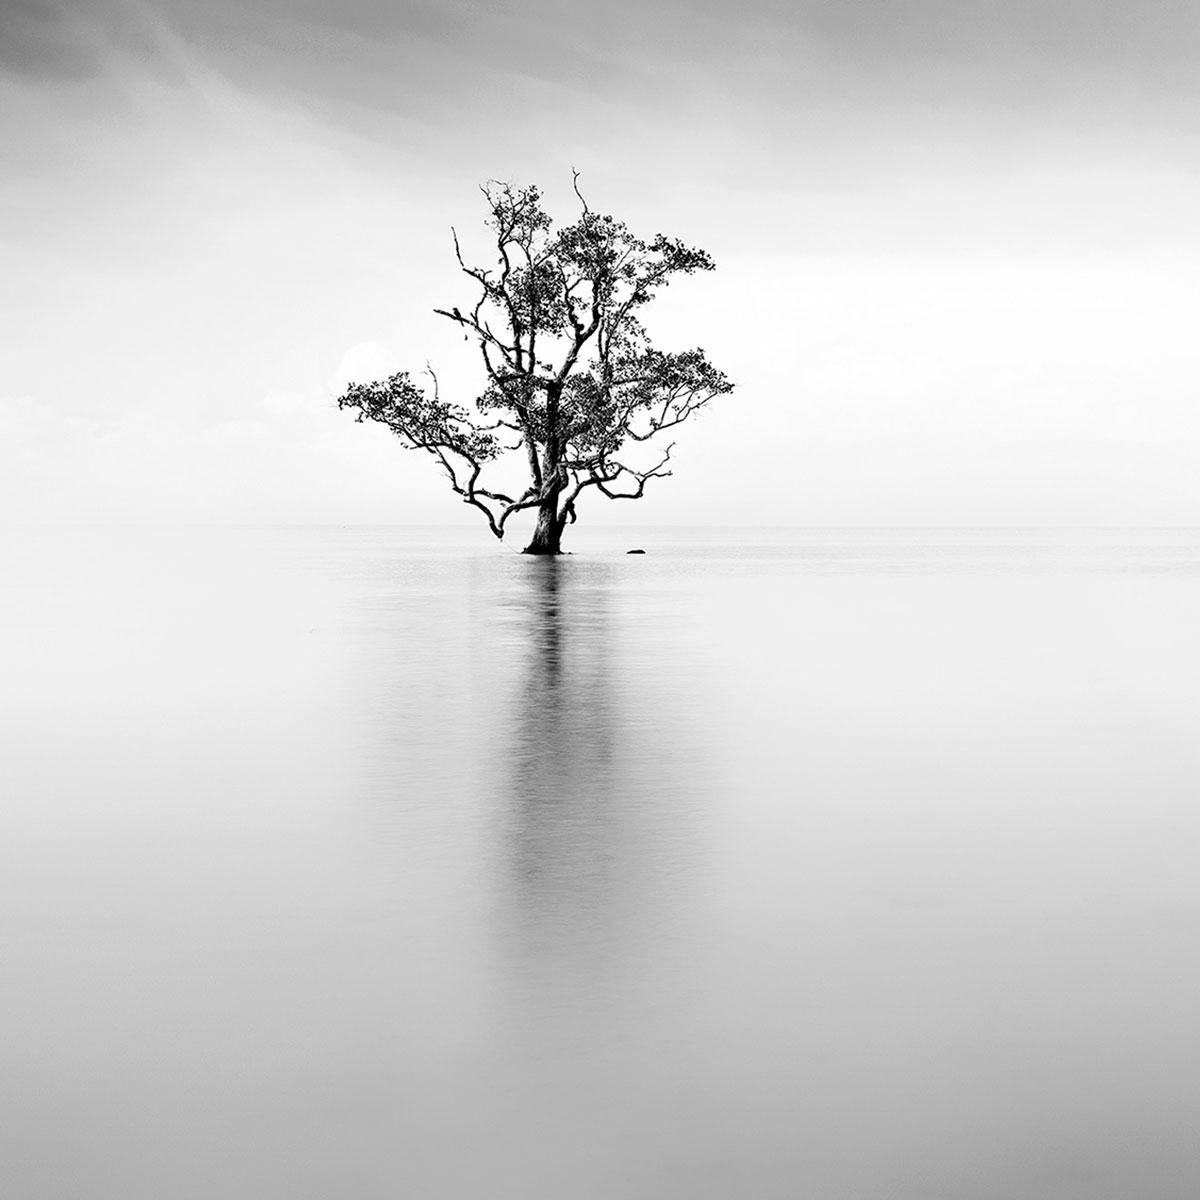 Eternal - ETHEREAL 3 by Alexandre Manuel (Black and white minimalist)